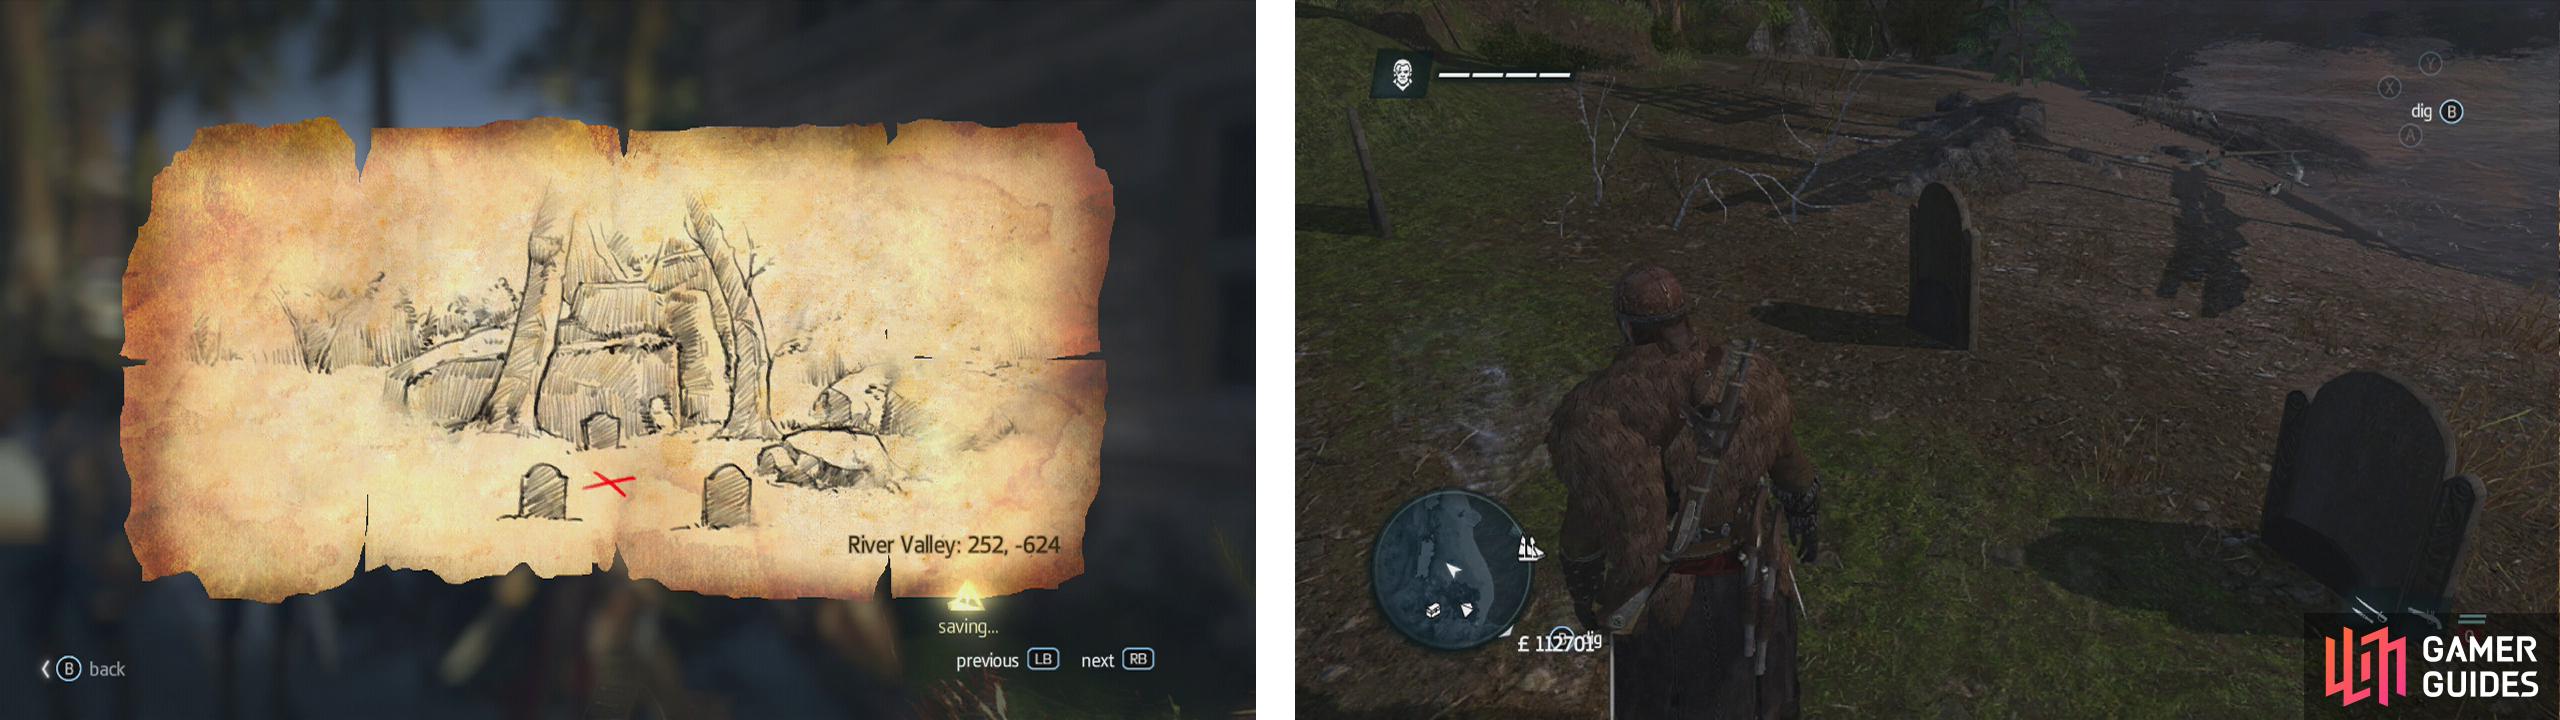 Go to the co-ordinates on the map (left) and find the location drawn (right) to find a dig spot.